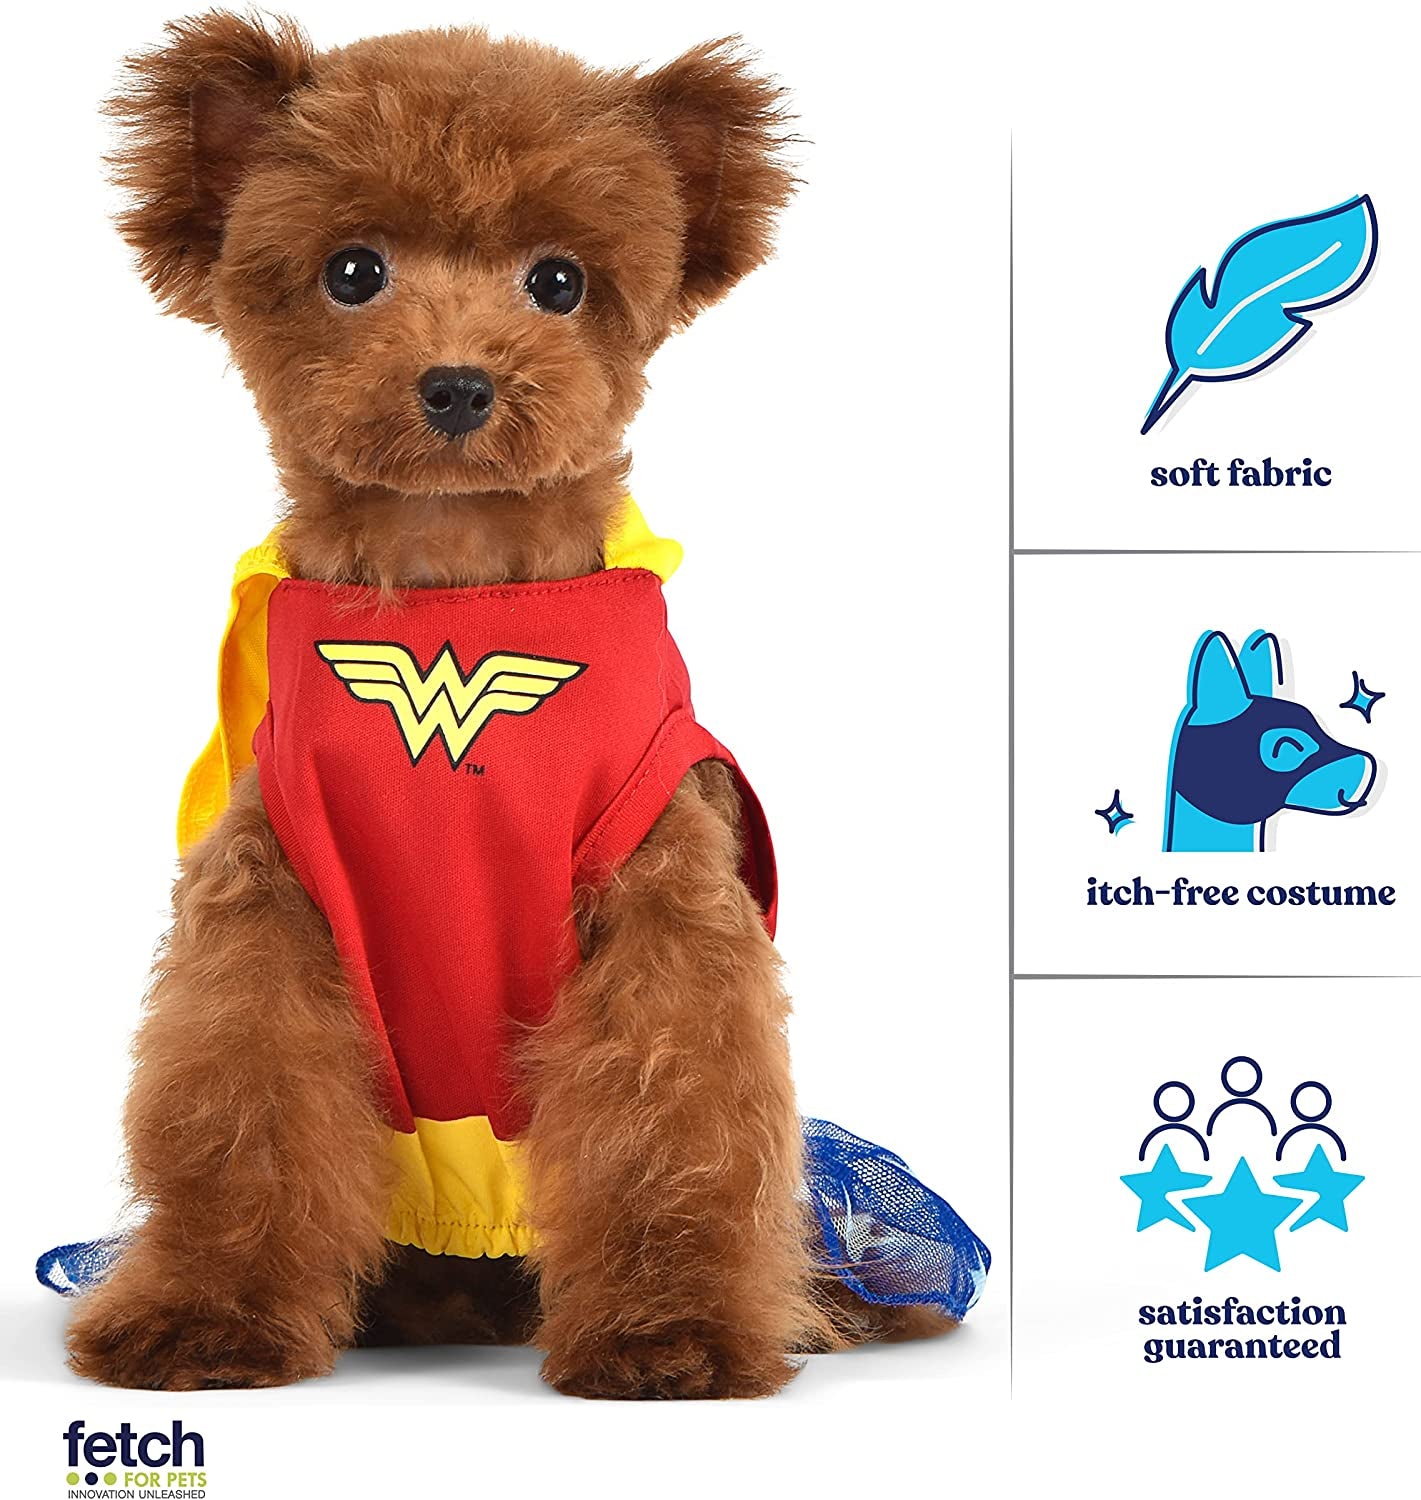 DC Comics Wonder Woman Dog Costume, X-Small (XS) | Hooded Superhero Costume for Dogs | Red, Yellow, Blue Wonder Woman Costume Dog Halloween Costumes for Small Dogs | See Sizing Chart for More Info